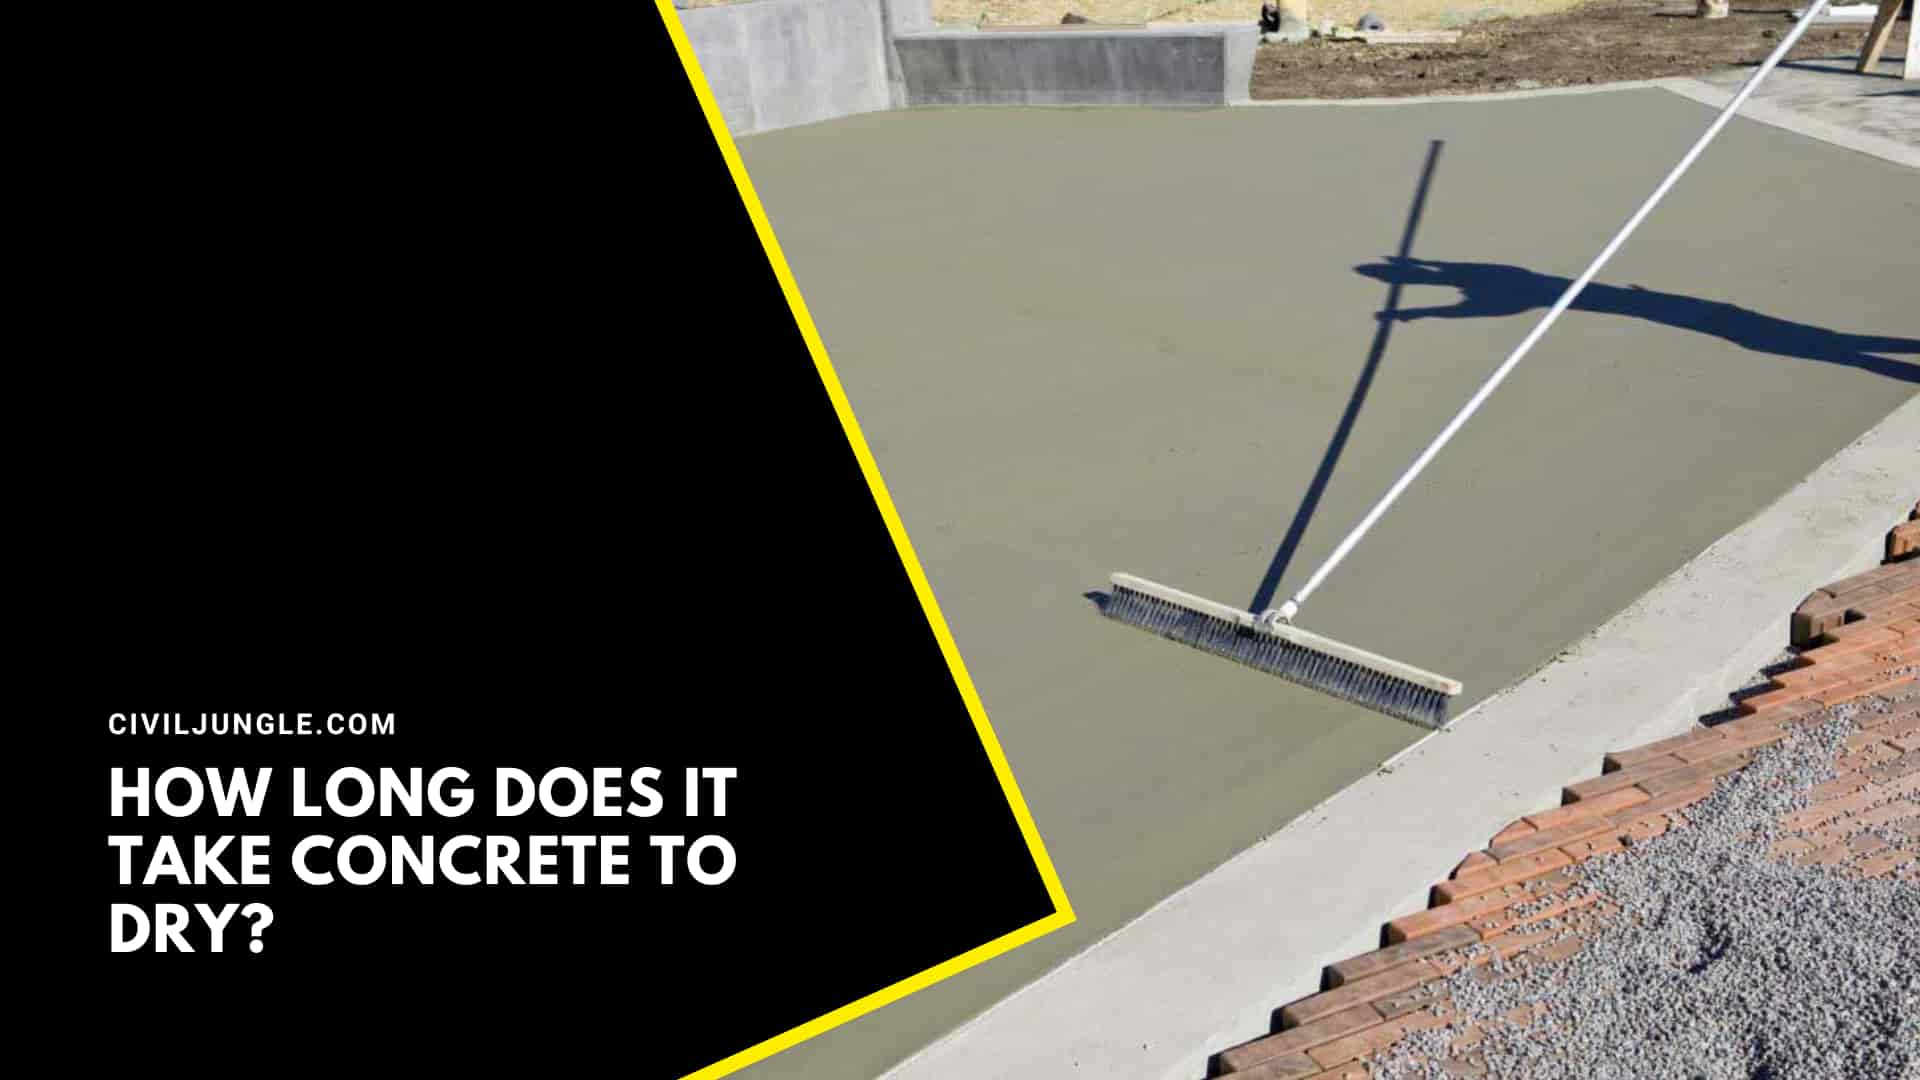 How Long Does It Take Concrete to Dry